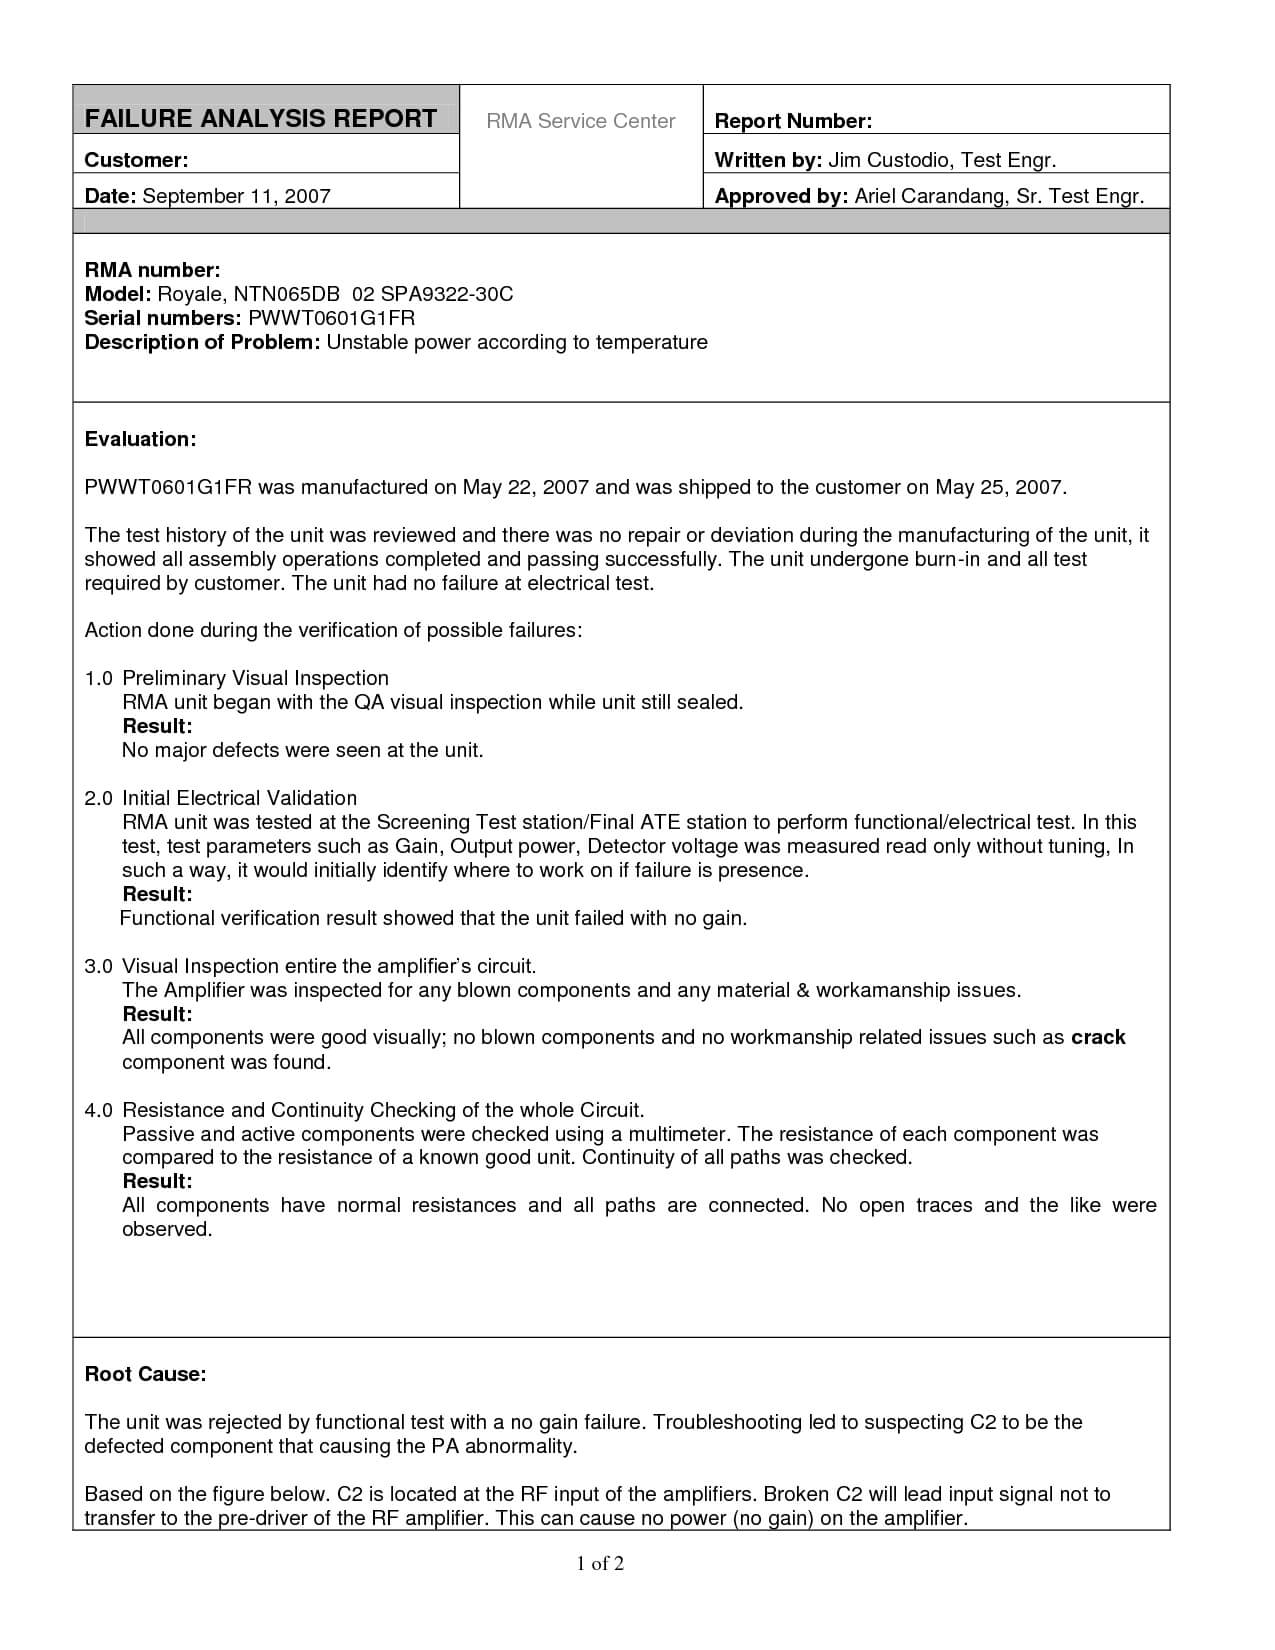 Recommendation Memo Report Sample Writing Example Pdf With Failure Investigation Report Template